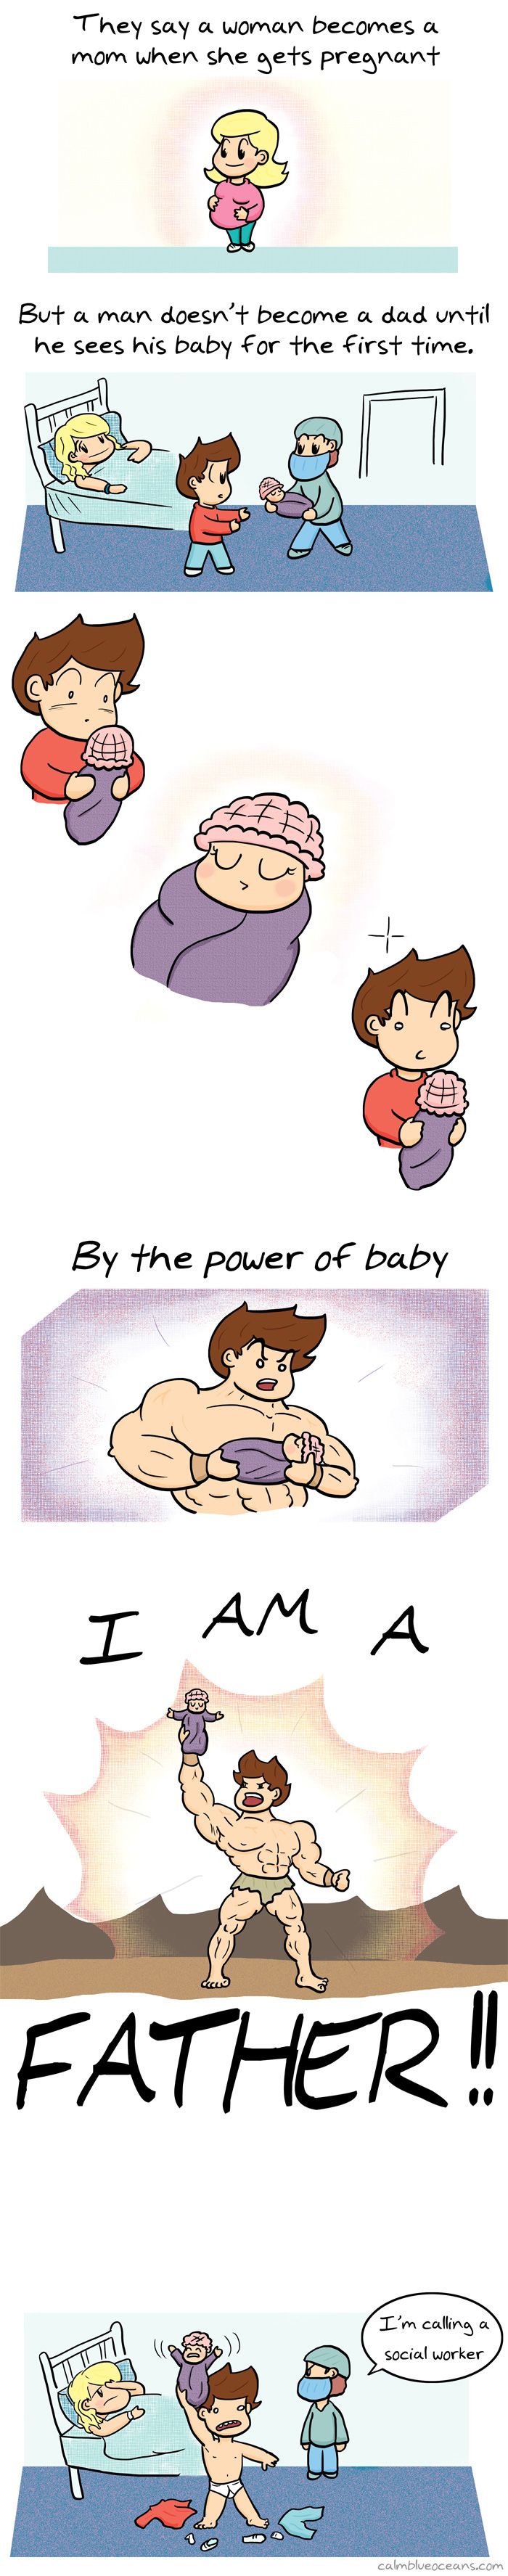 Father meme,father son meme,fathers day,happy fathers day,comic,doodle,parents meme,meme,funny,father and son meme,father and son,A man becomes father when,little baby kid